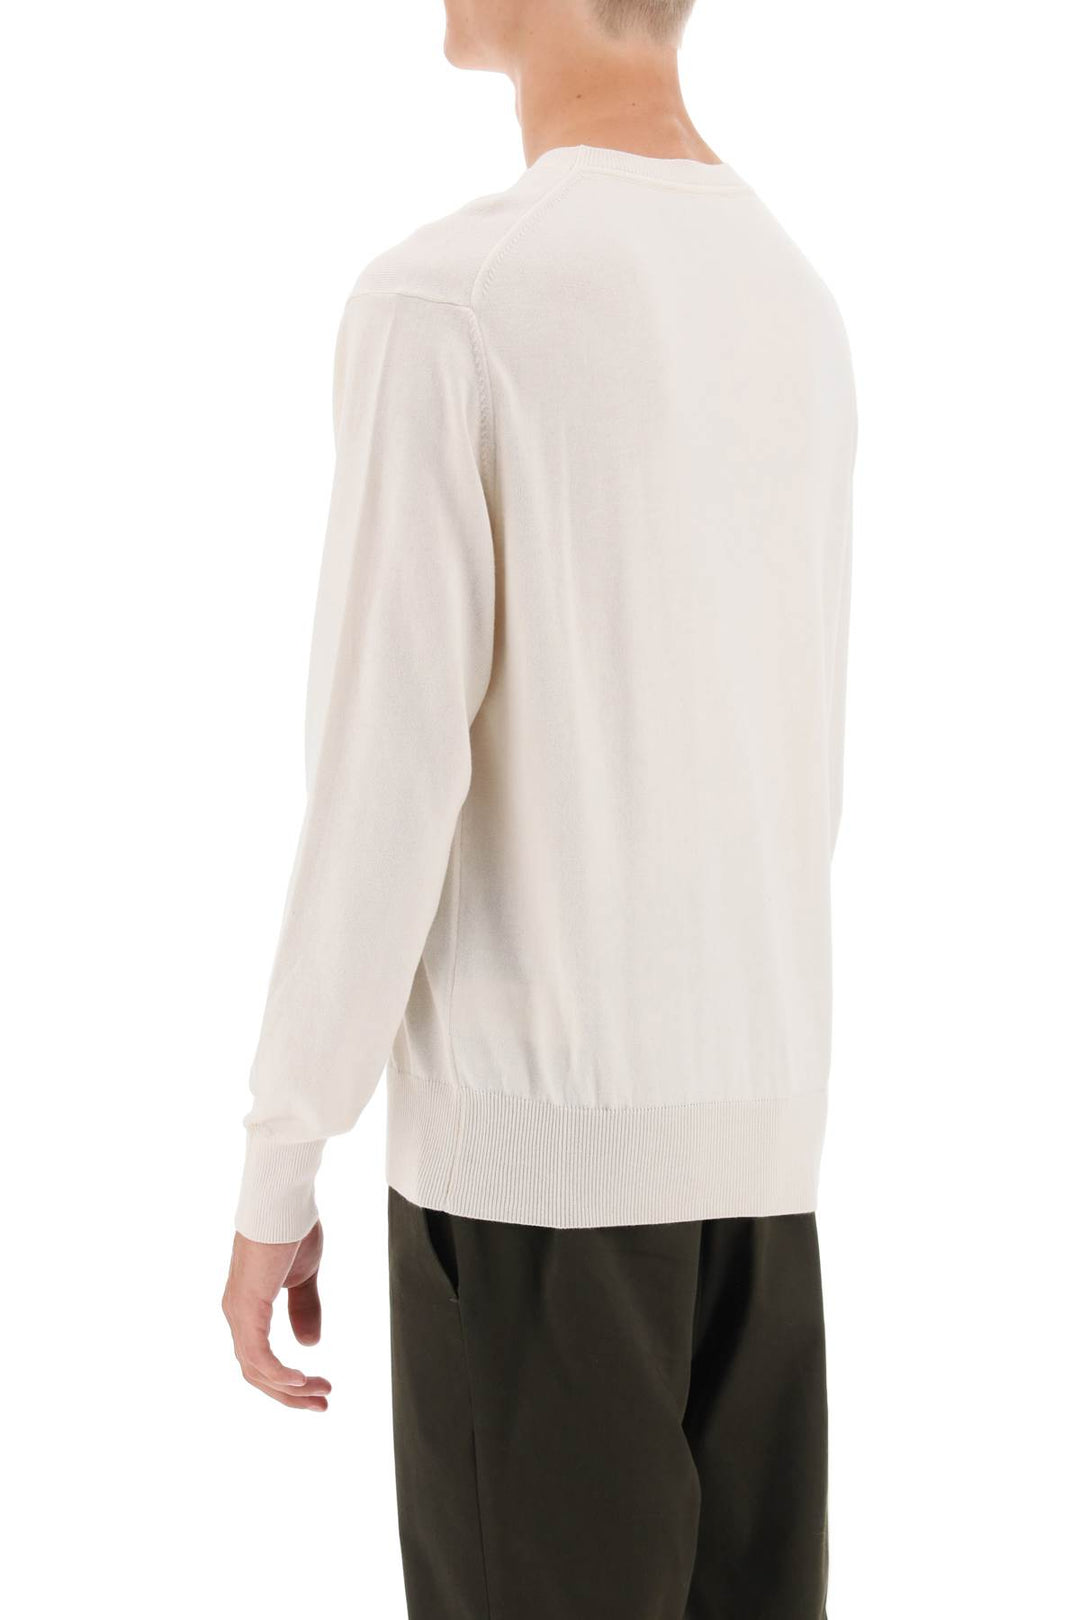 Vivienne westwood organic cotton and cashmere sweater-2